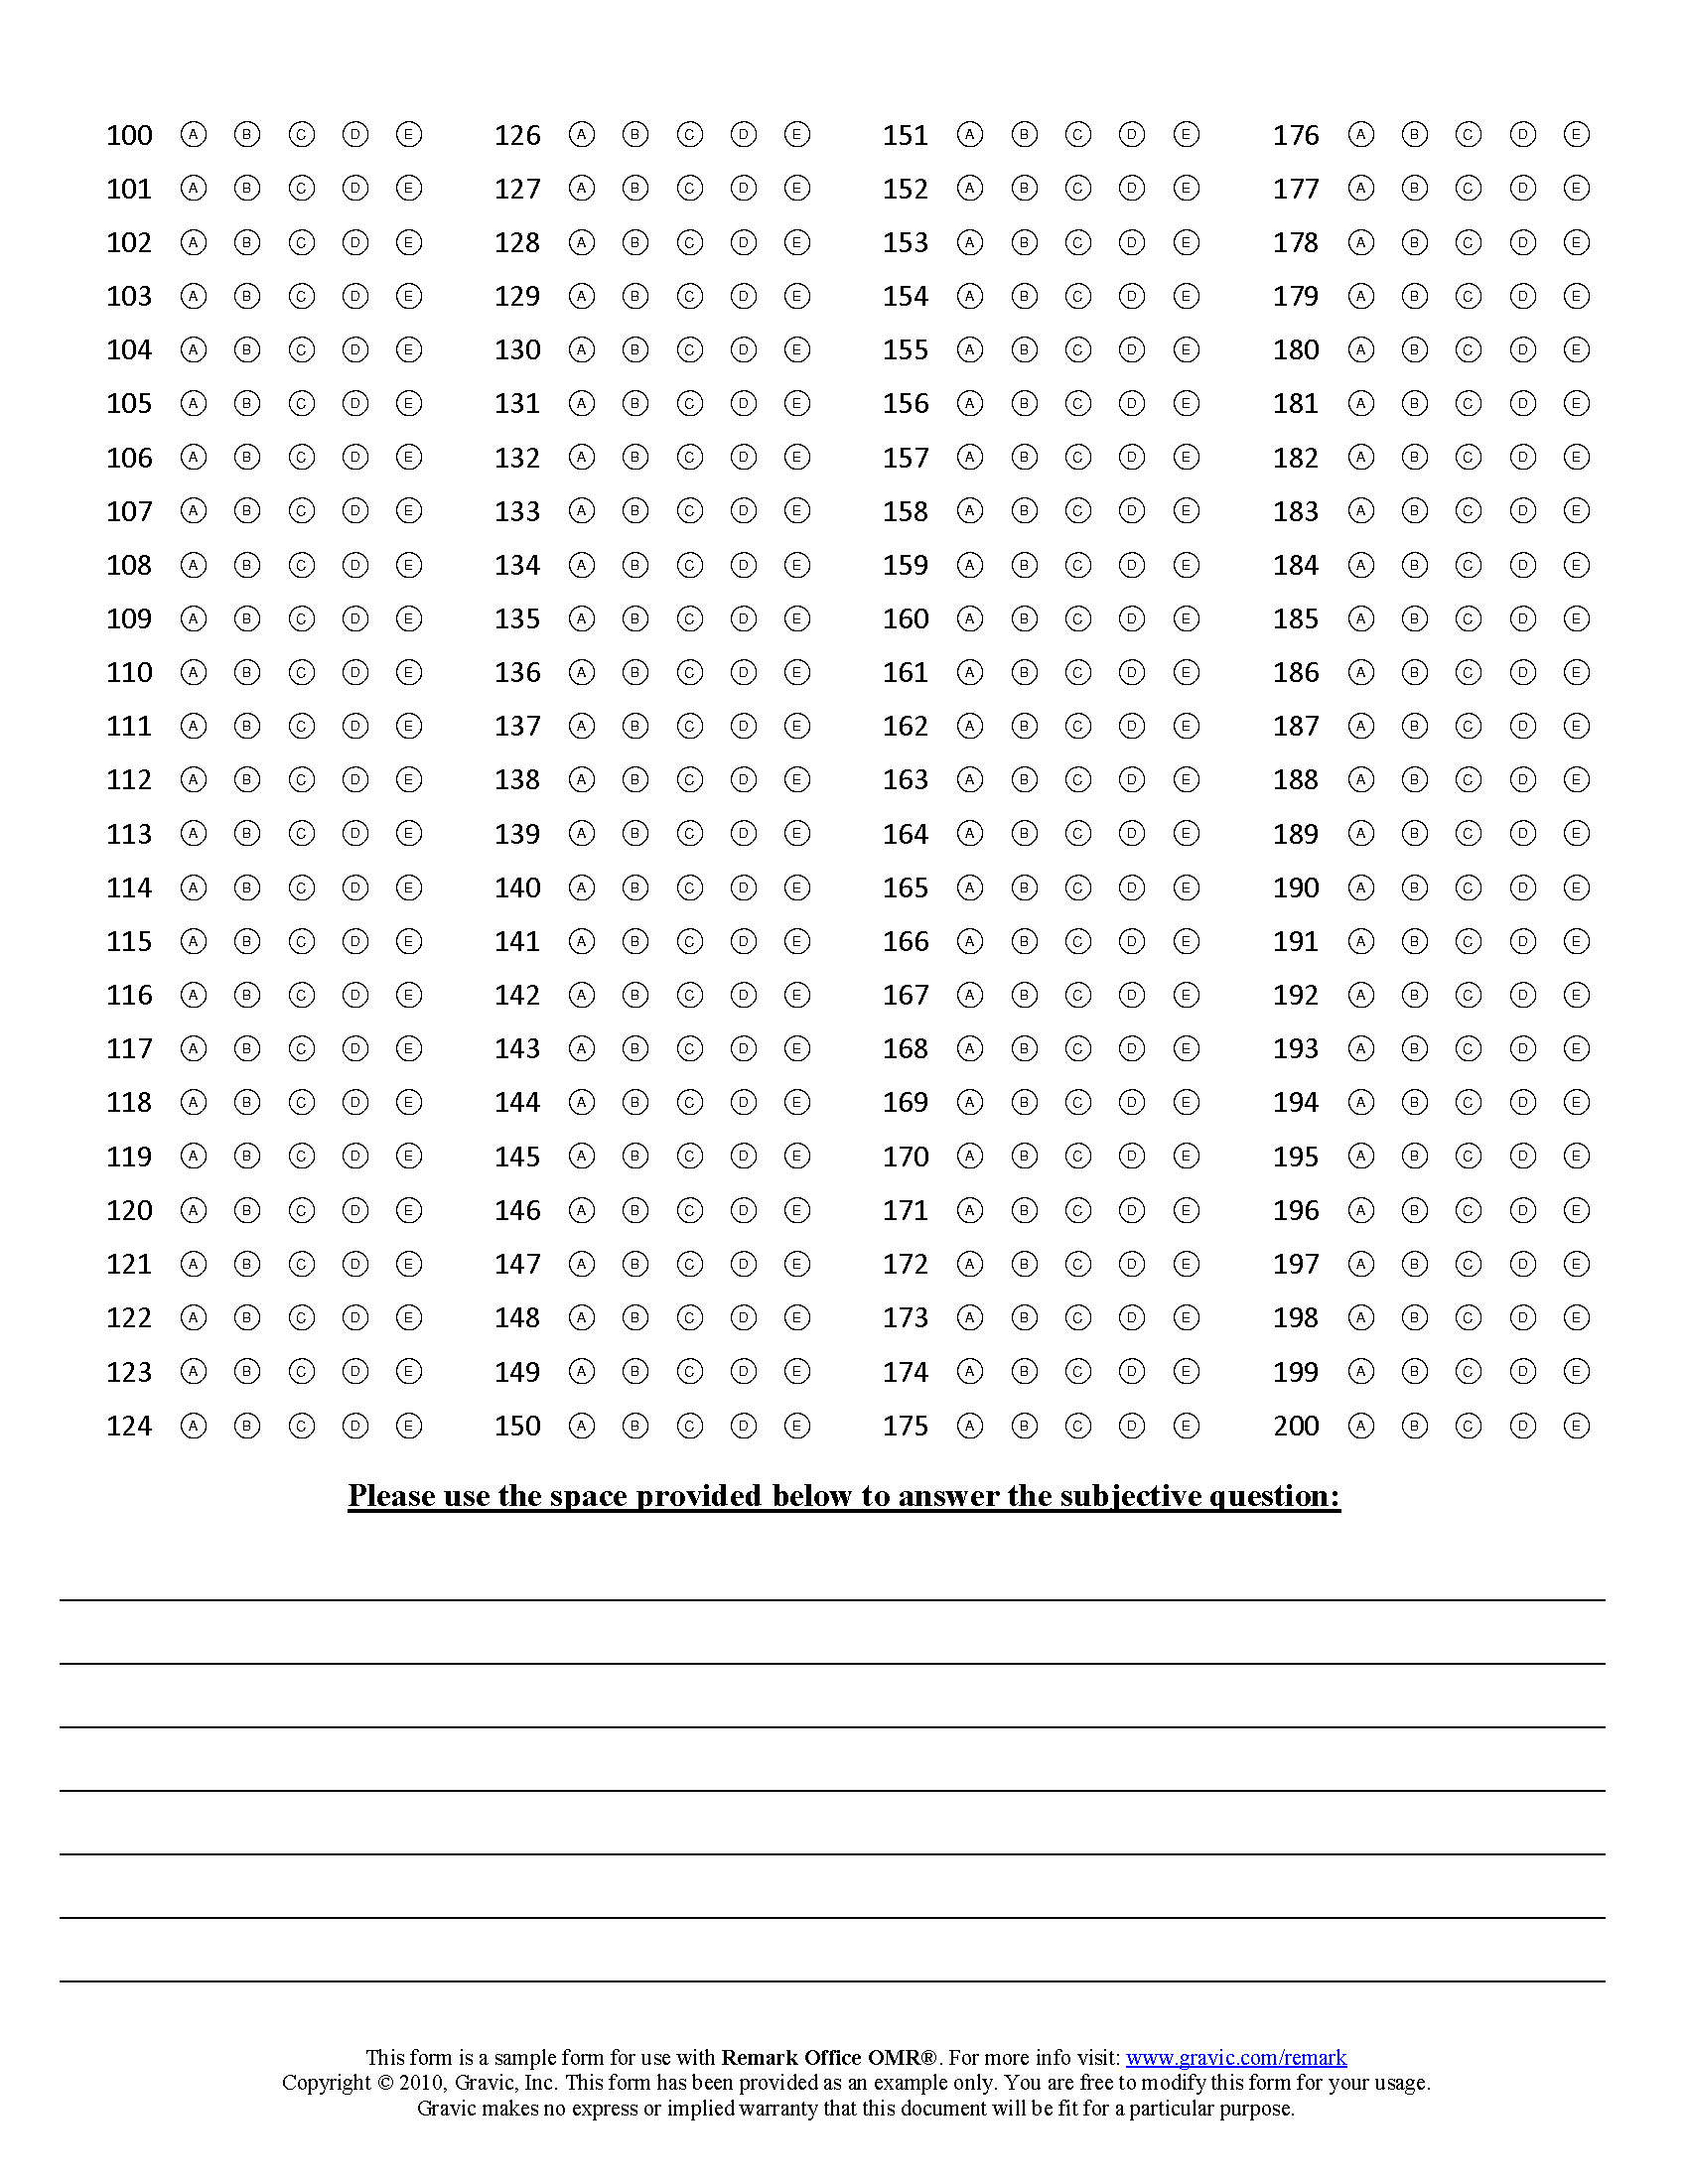 200-question-test-answer-sheet-with-subjective-question-remark-software